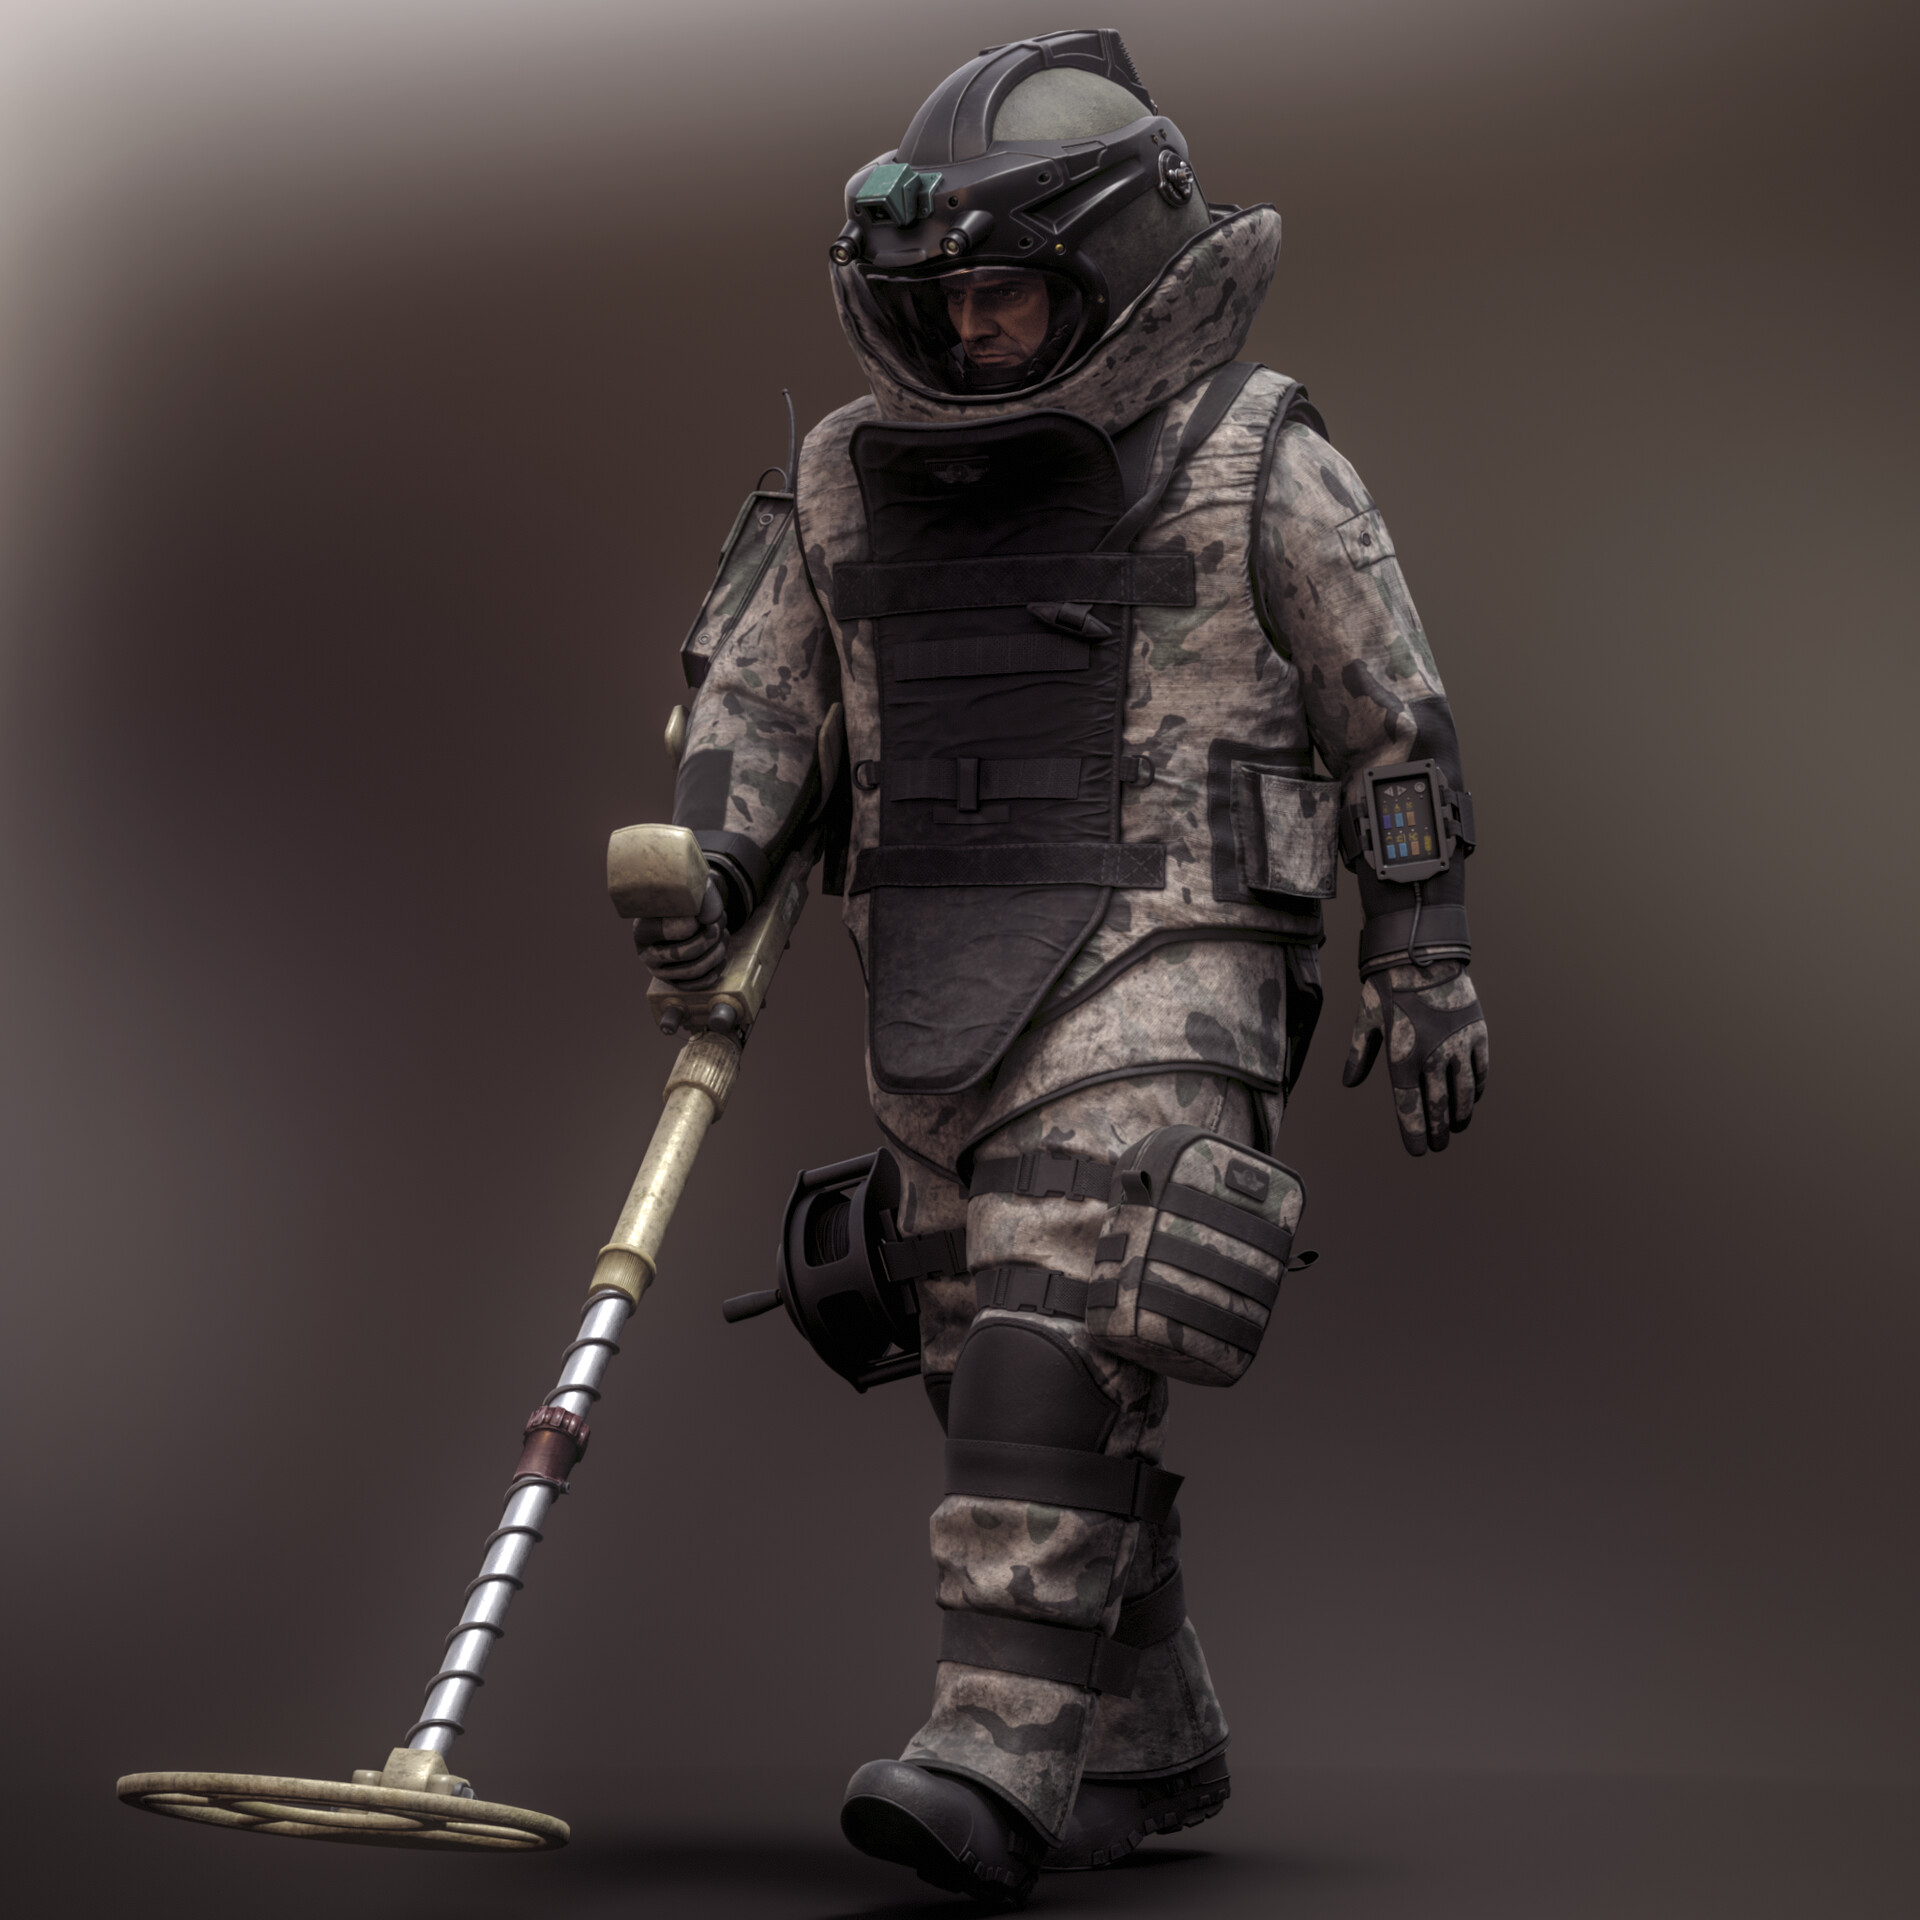 EOD-Bomb Disposal Suit - History in the Making